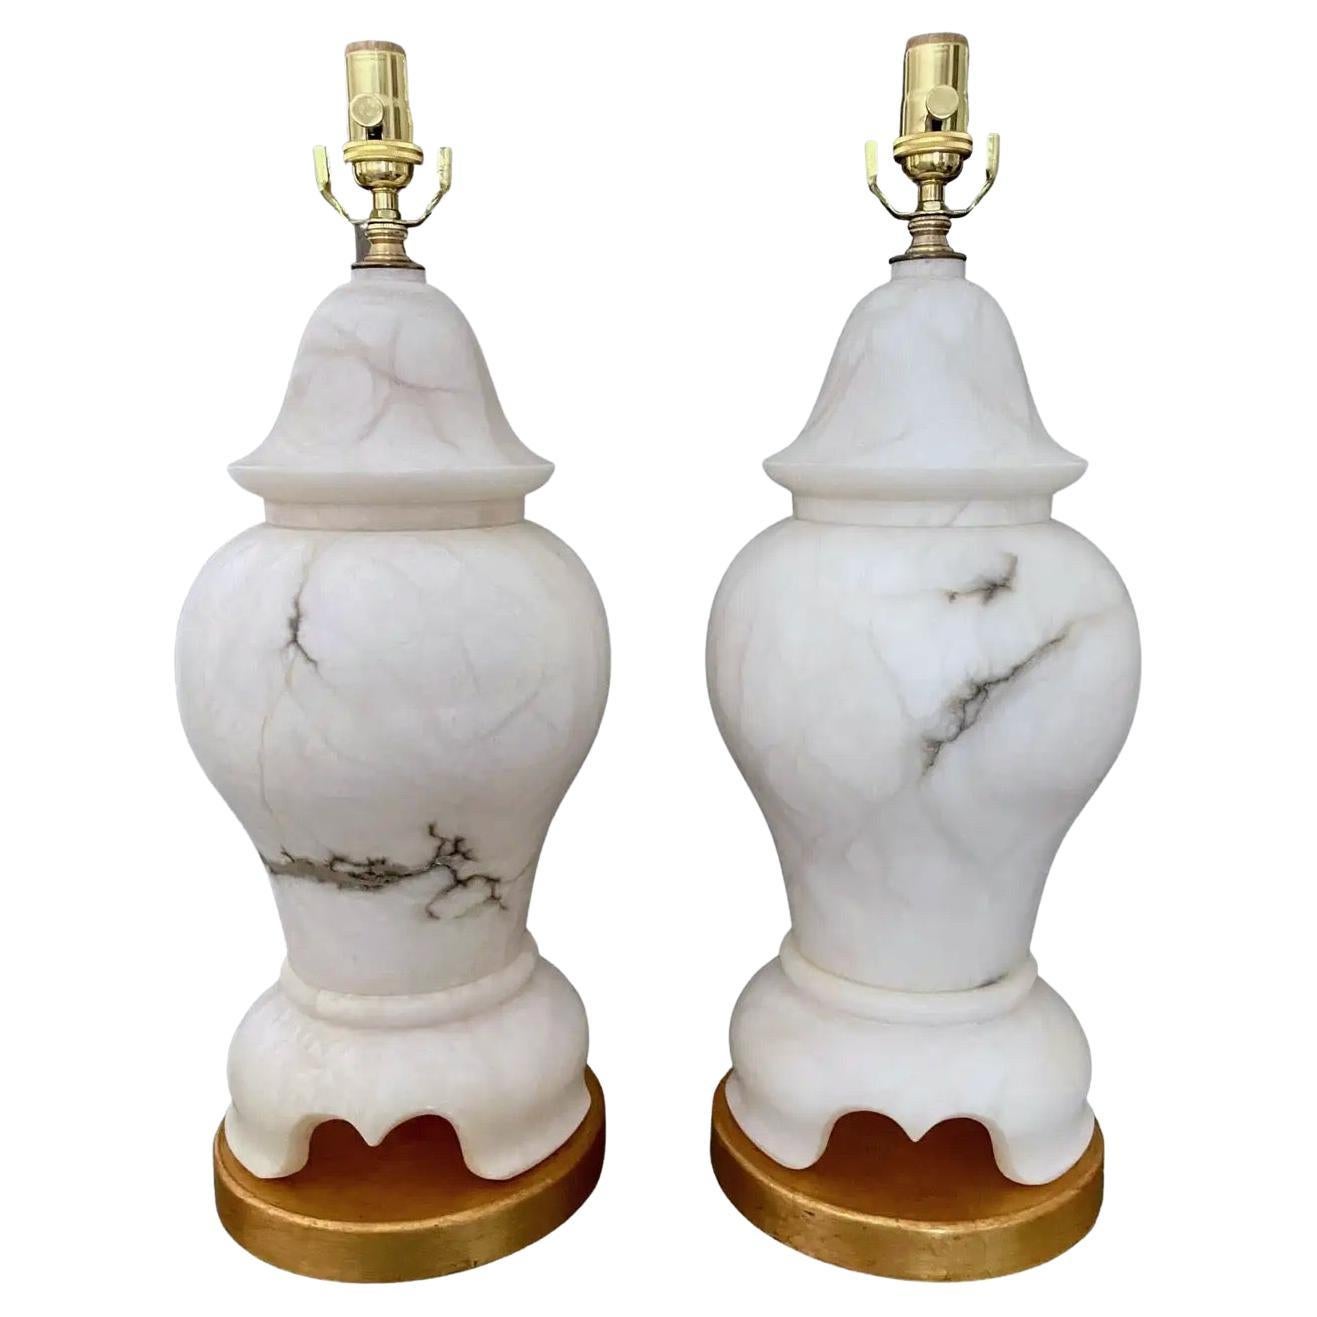 Pair of Alabaster Lidded Urn Table Lamps